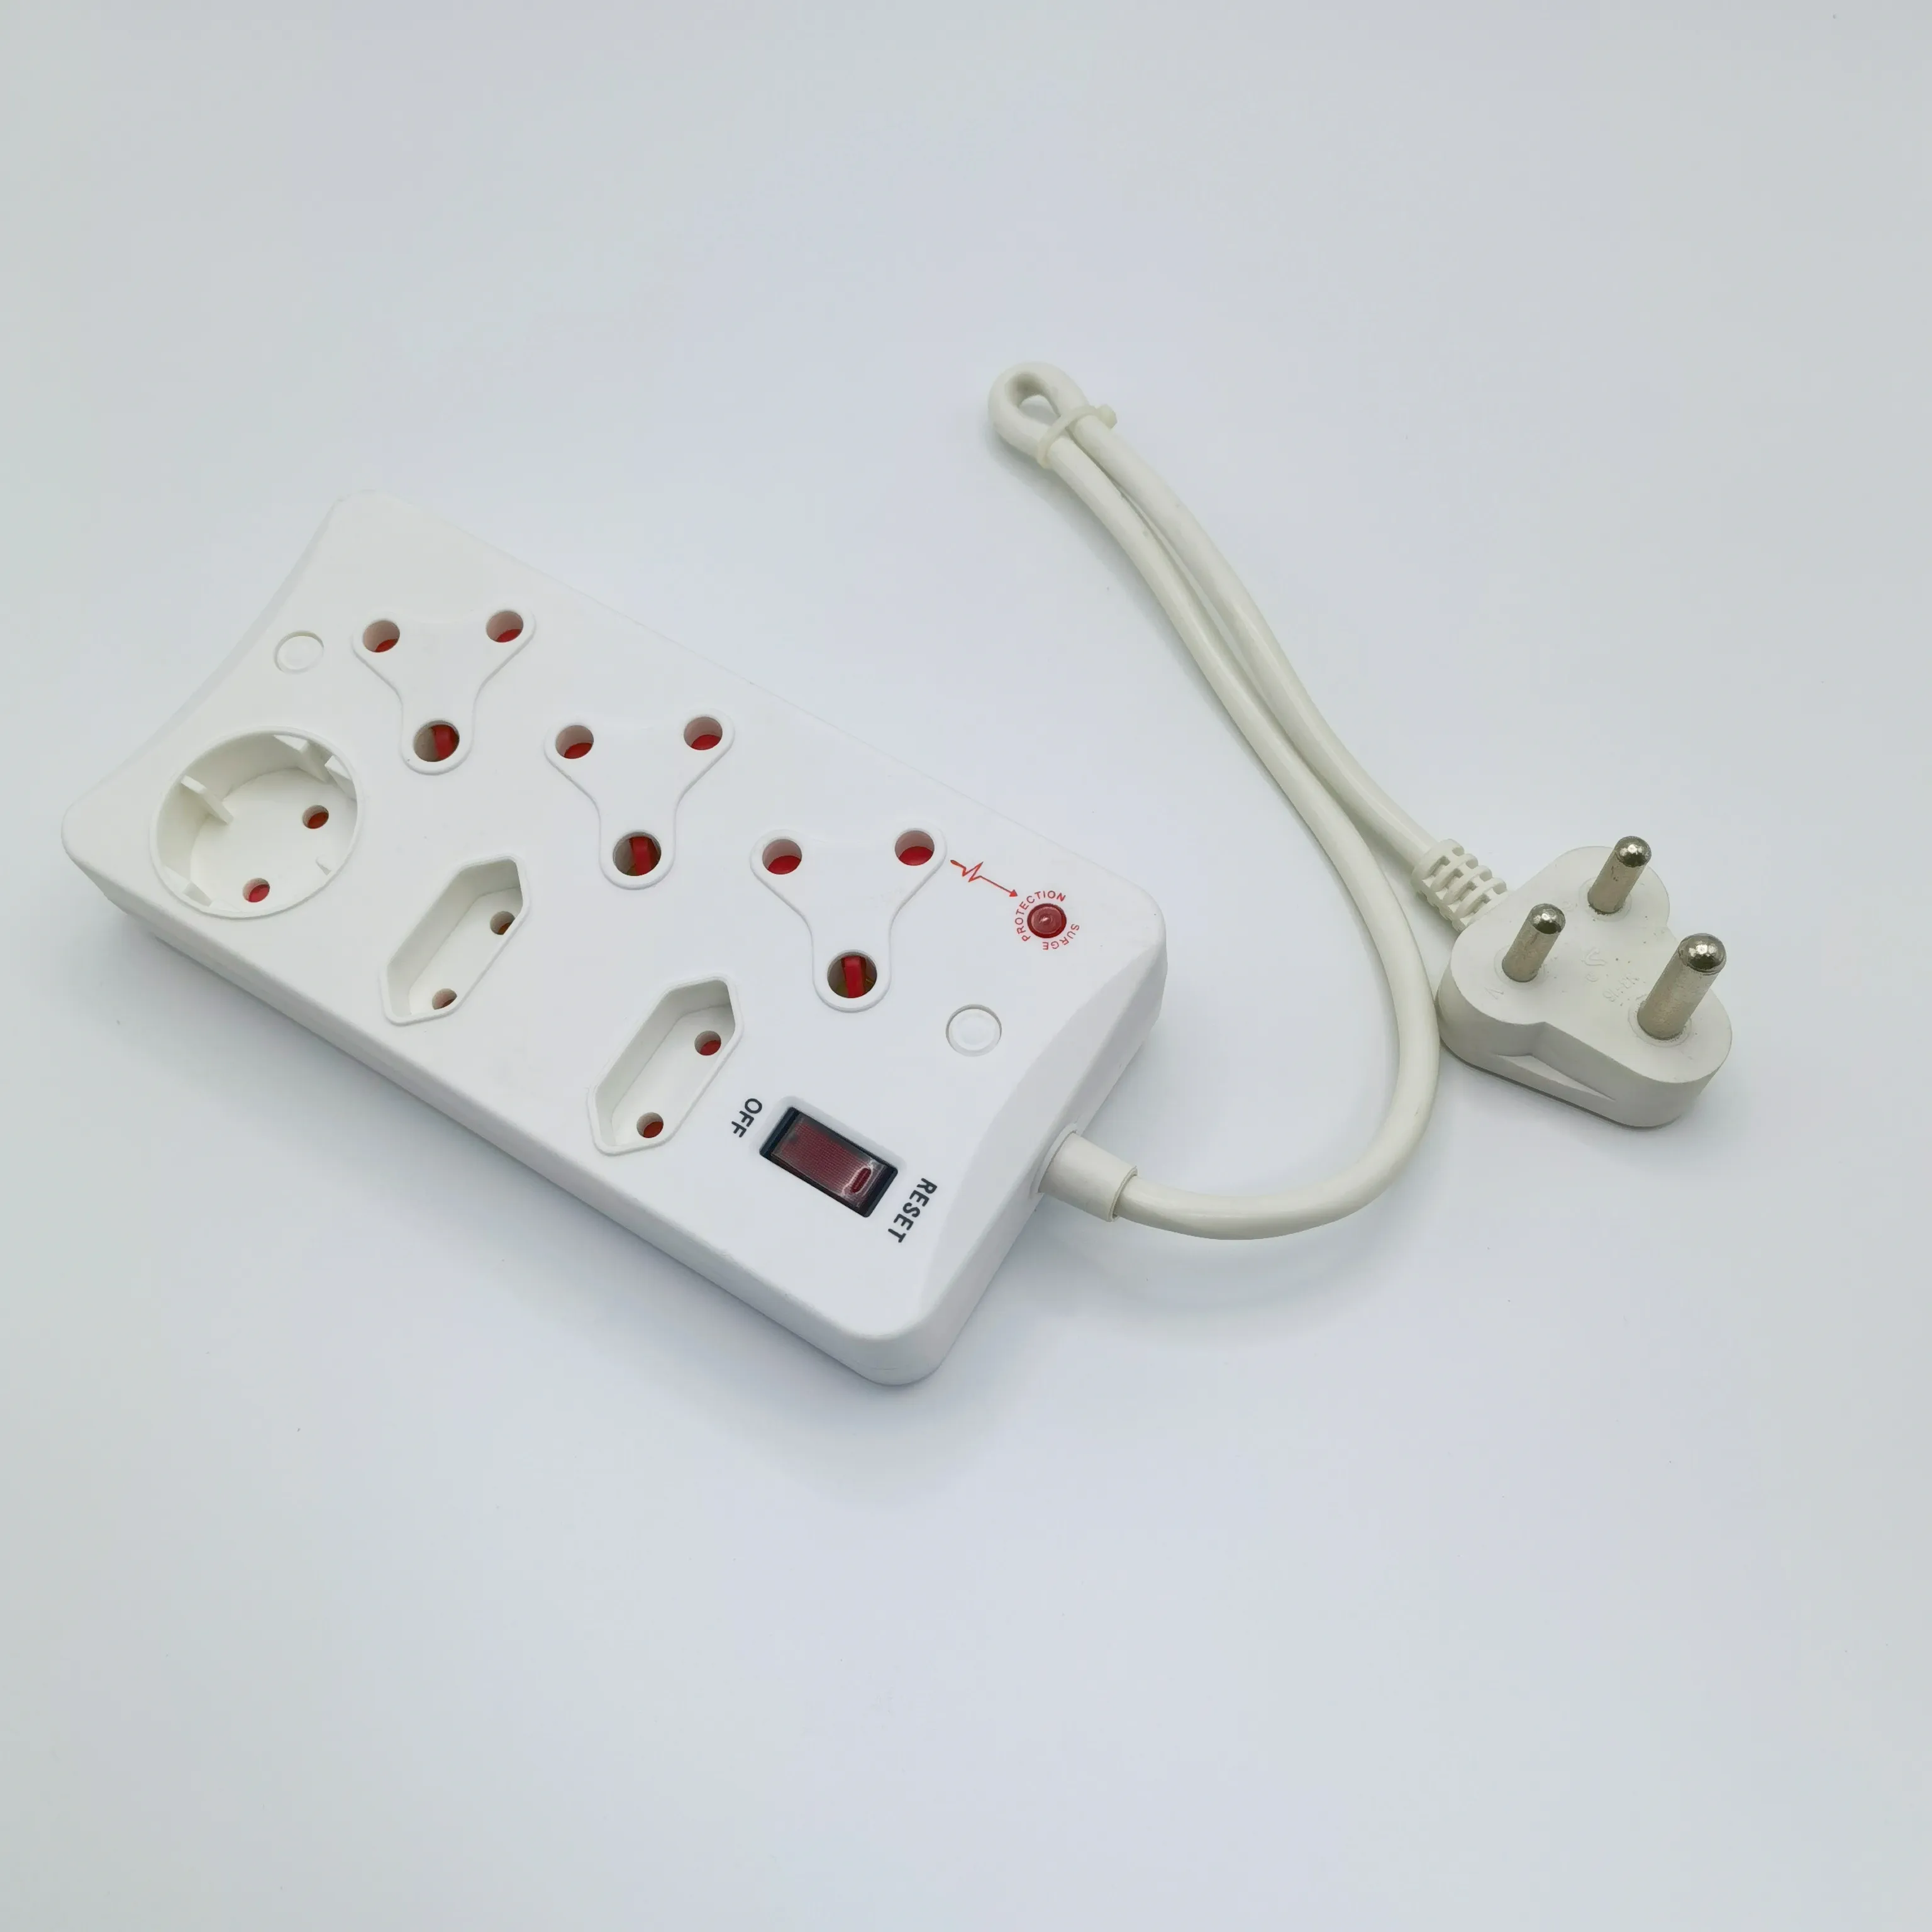 New Surge protector US power plug wall socket outlet extender with USB